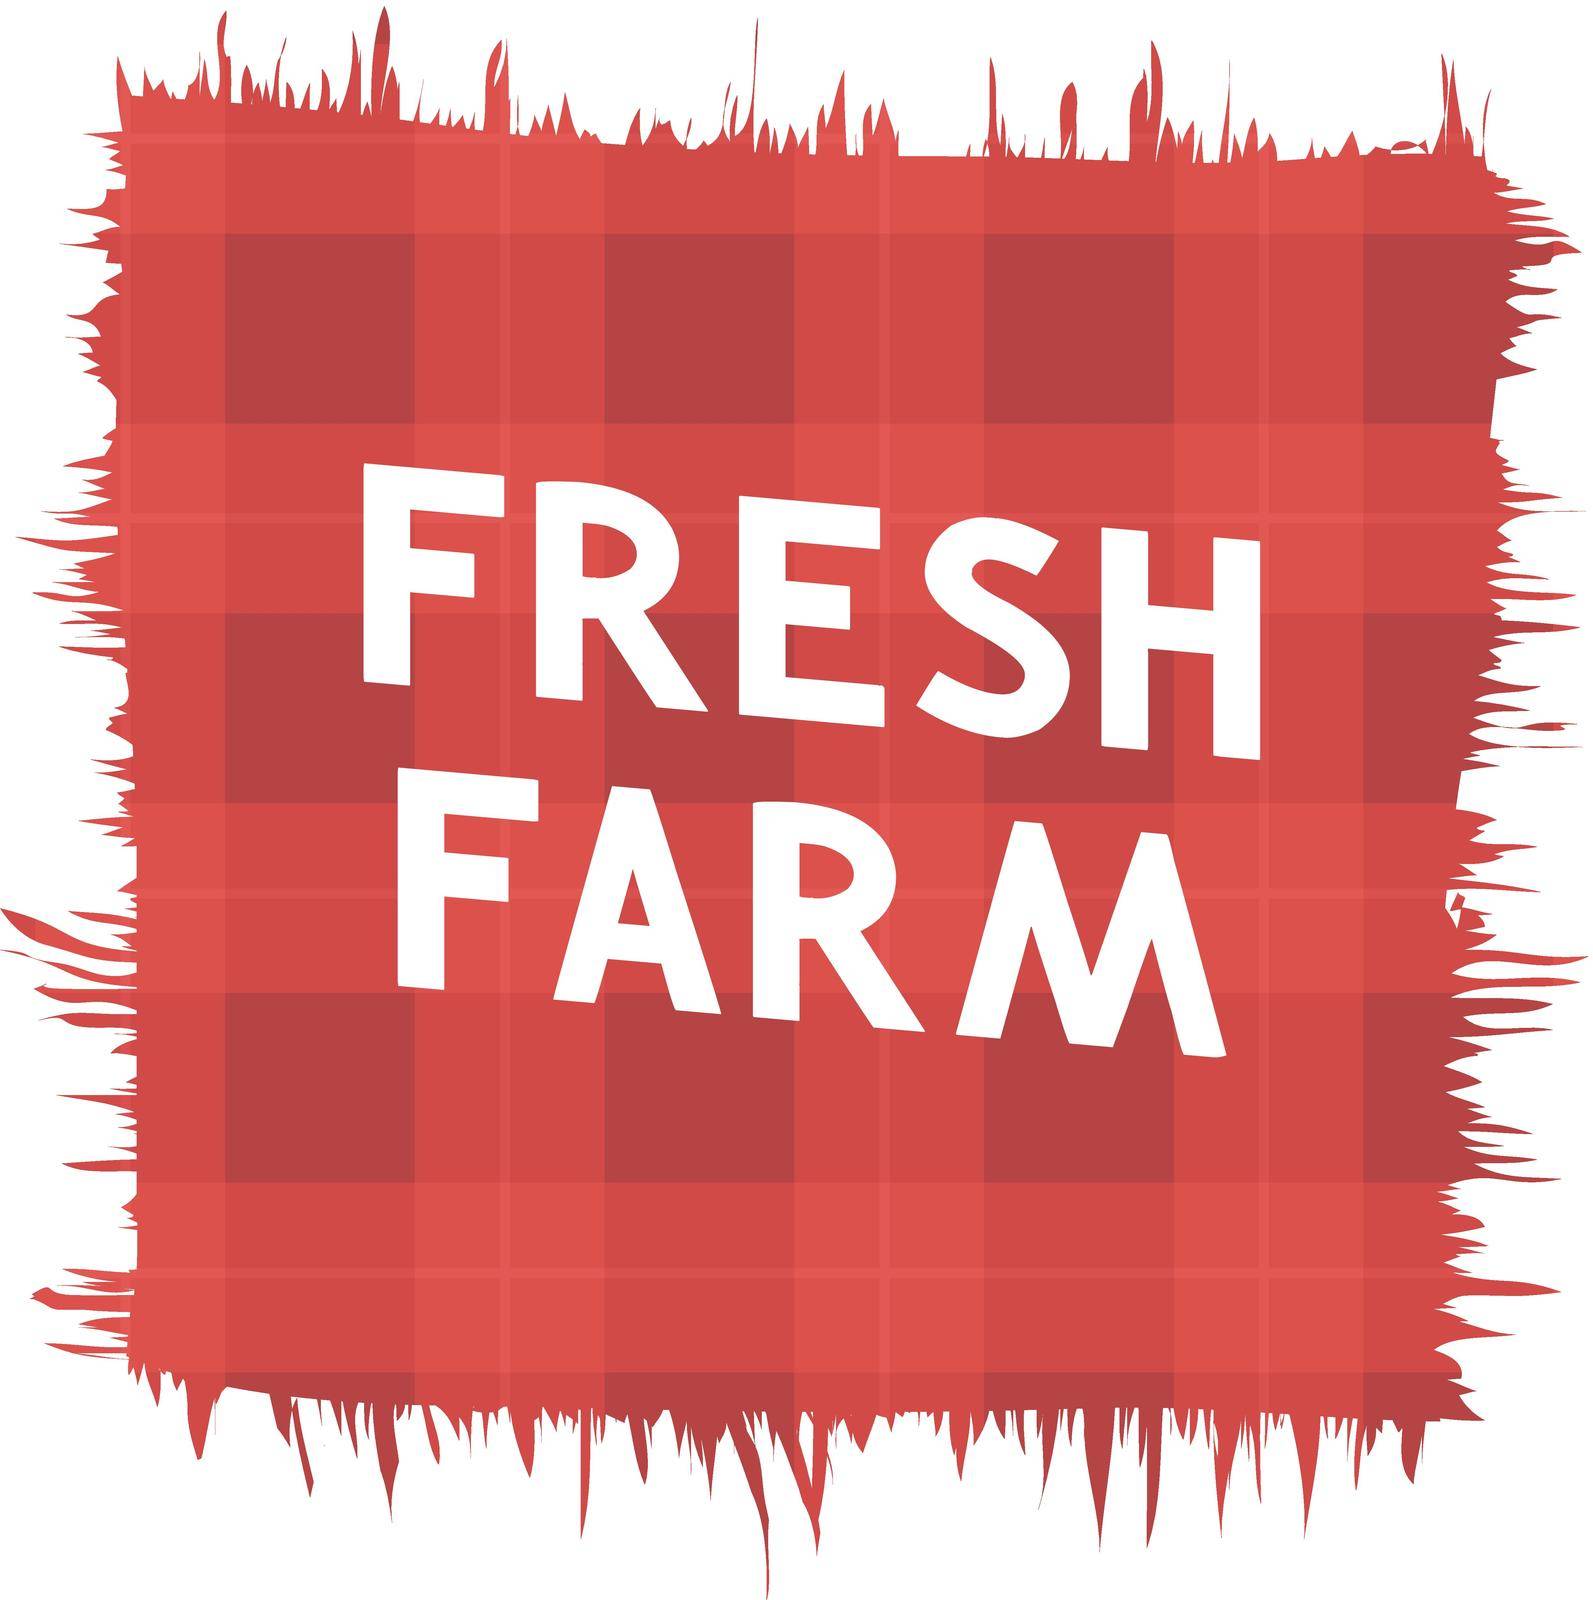 Fresh Farm, Emblem in Red Color with a Cage and Caption.